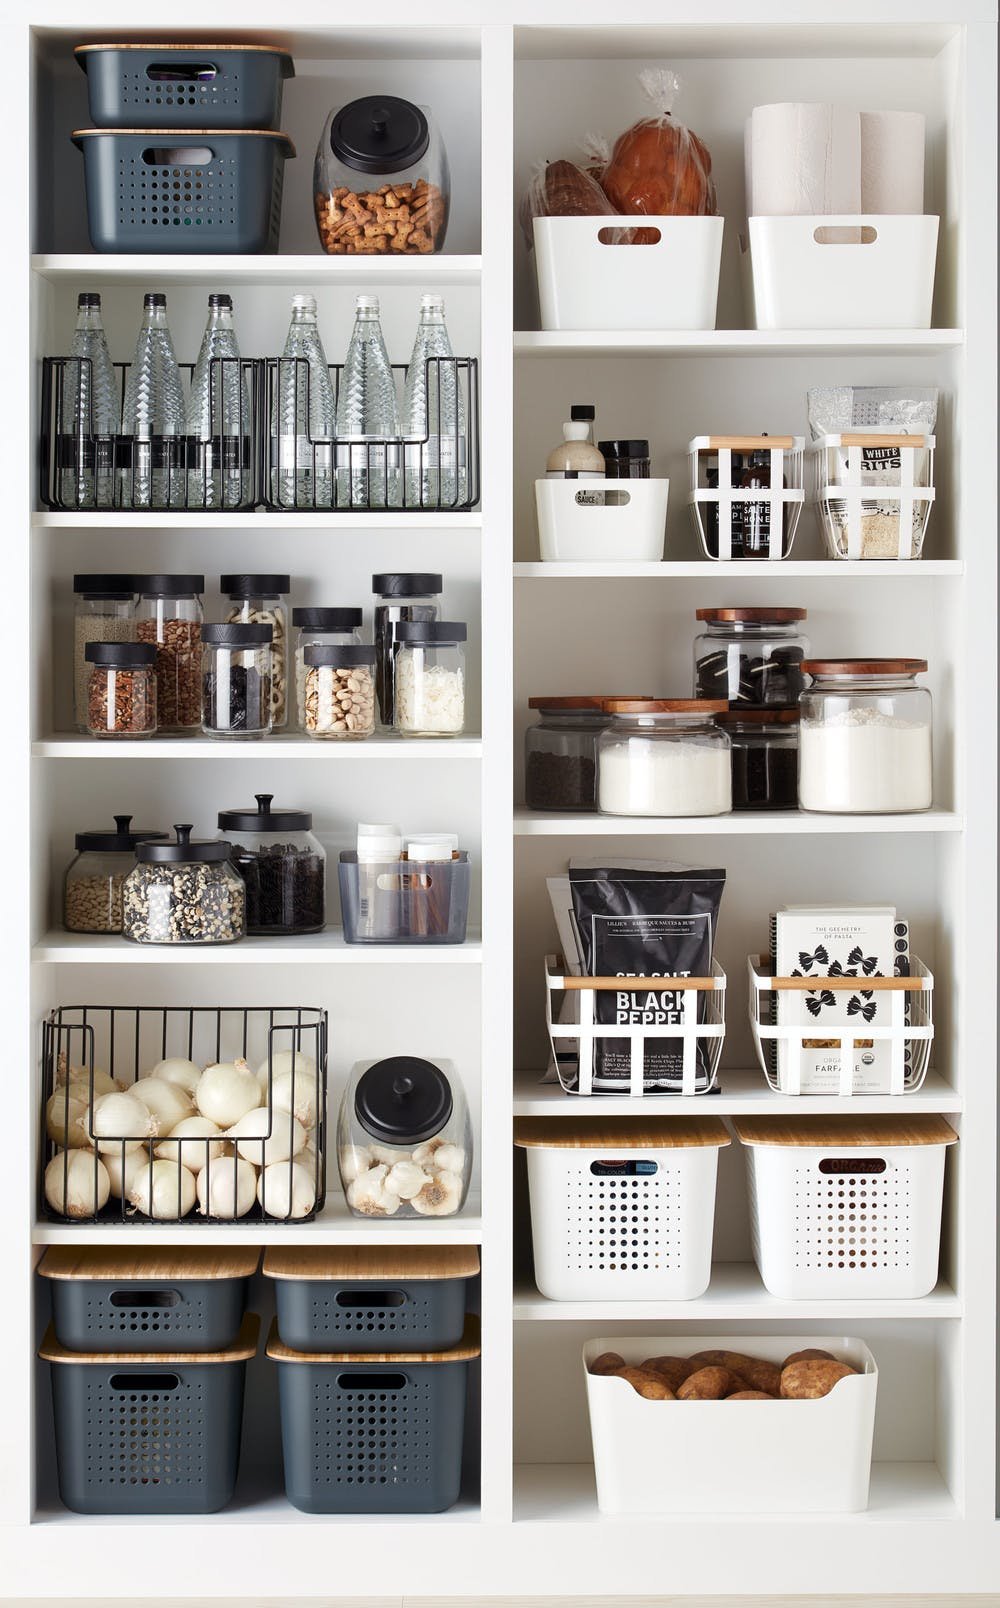 Kitchen Organization with The Home Edit - Studio McGee